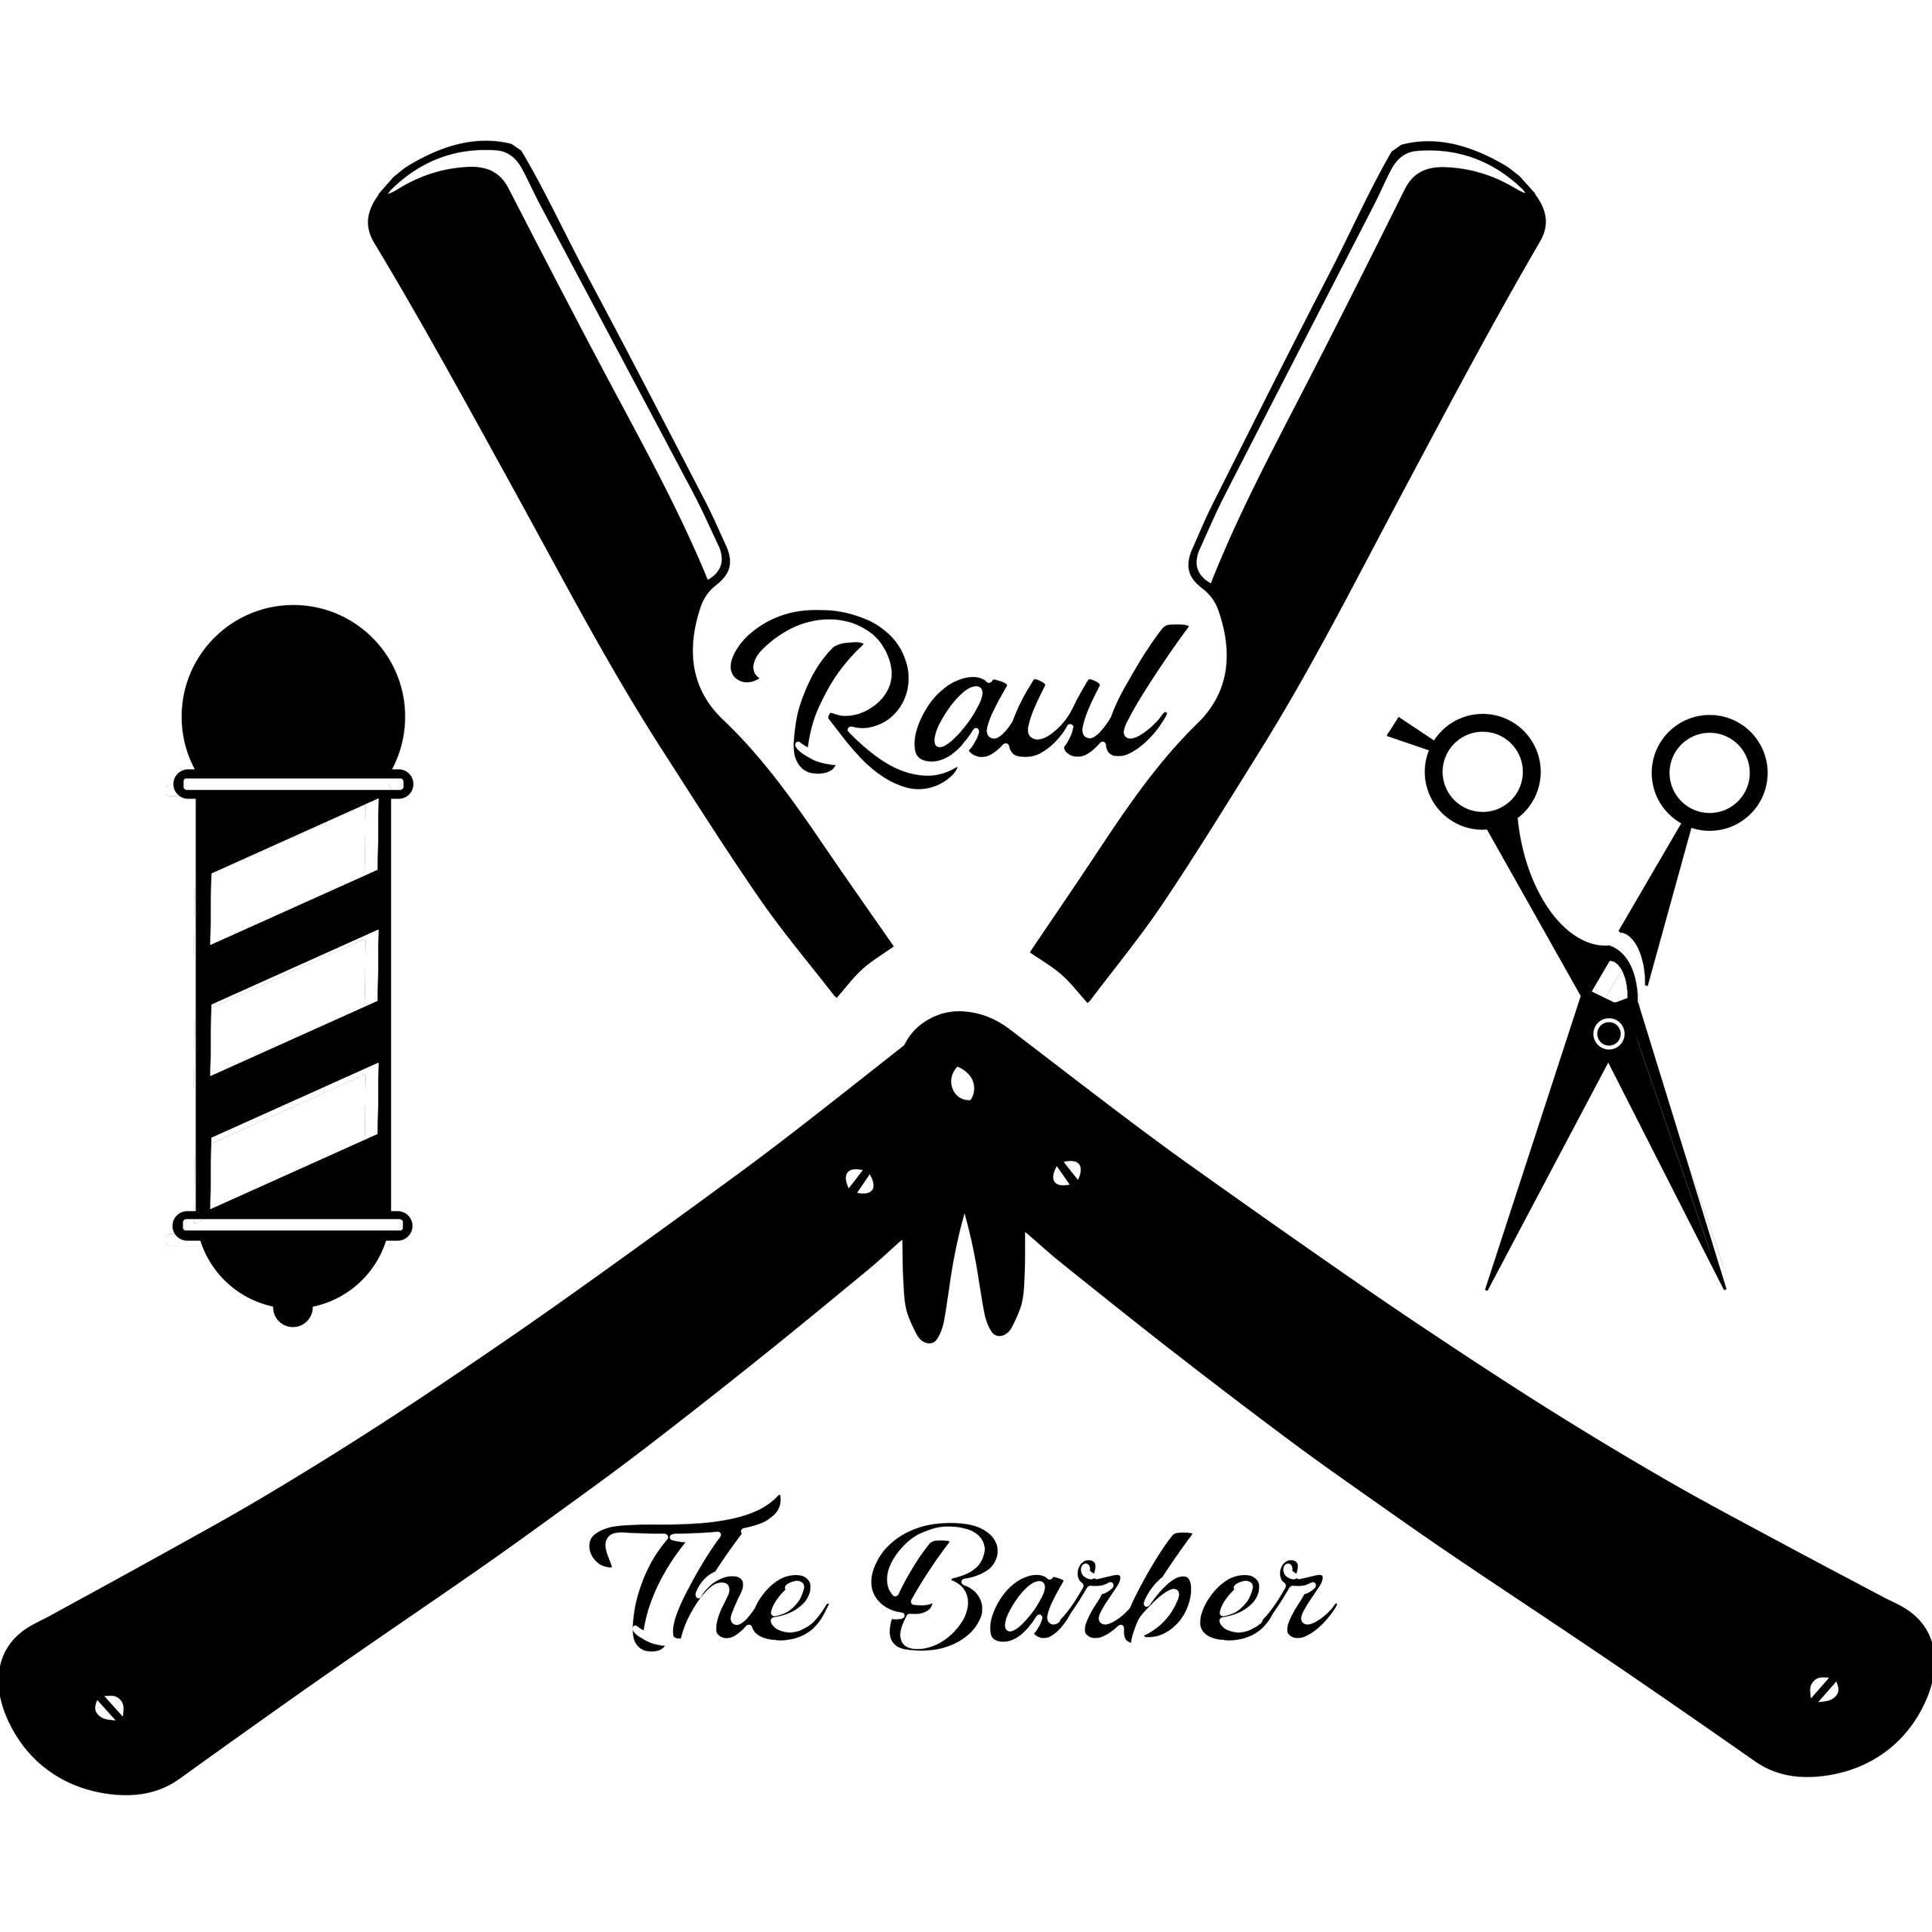 Raul The Barber, 318 North Imperial Avenue, Imperial, 92251